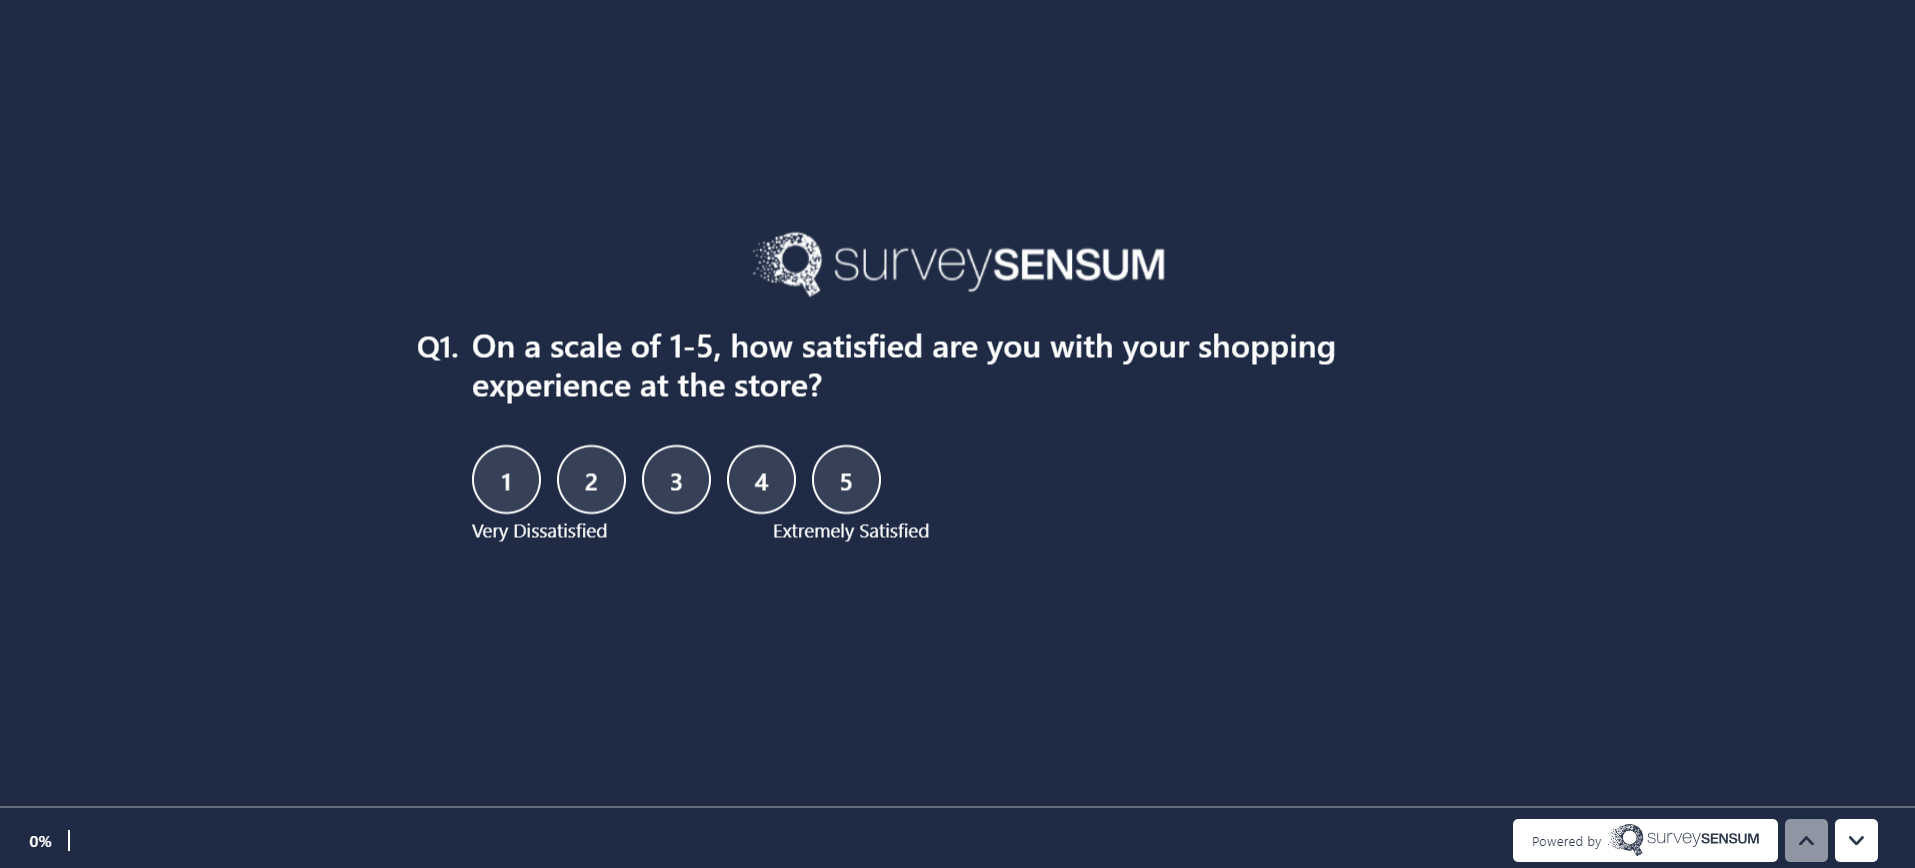 This image is of the CSAT survey where the customer is being asked if they are satisfied with the shopping experience on a scale of 1-5.